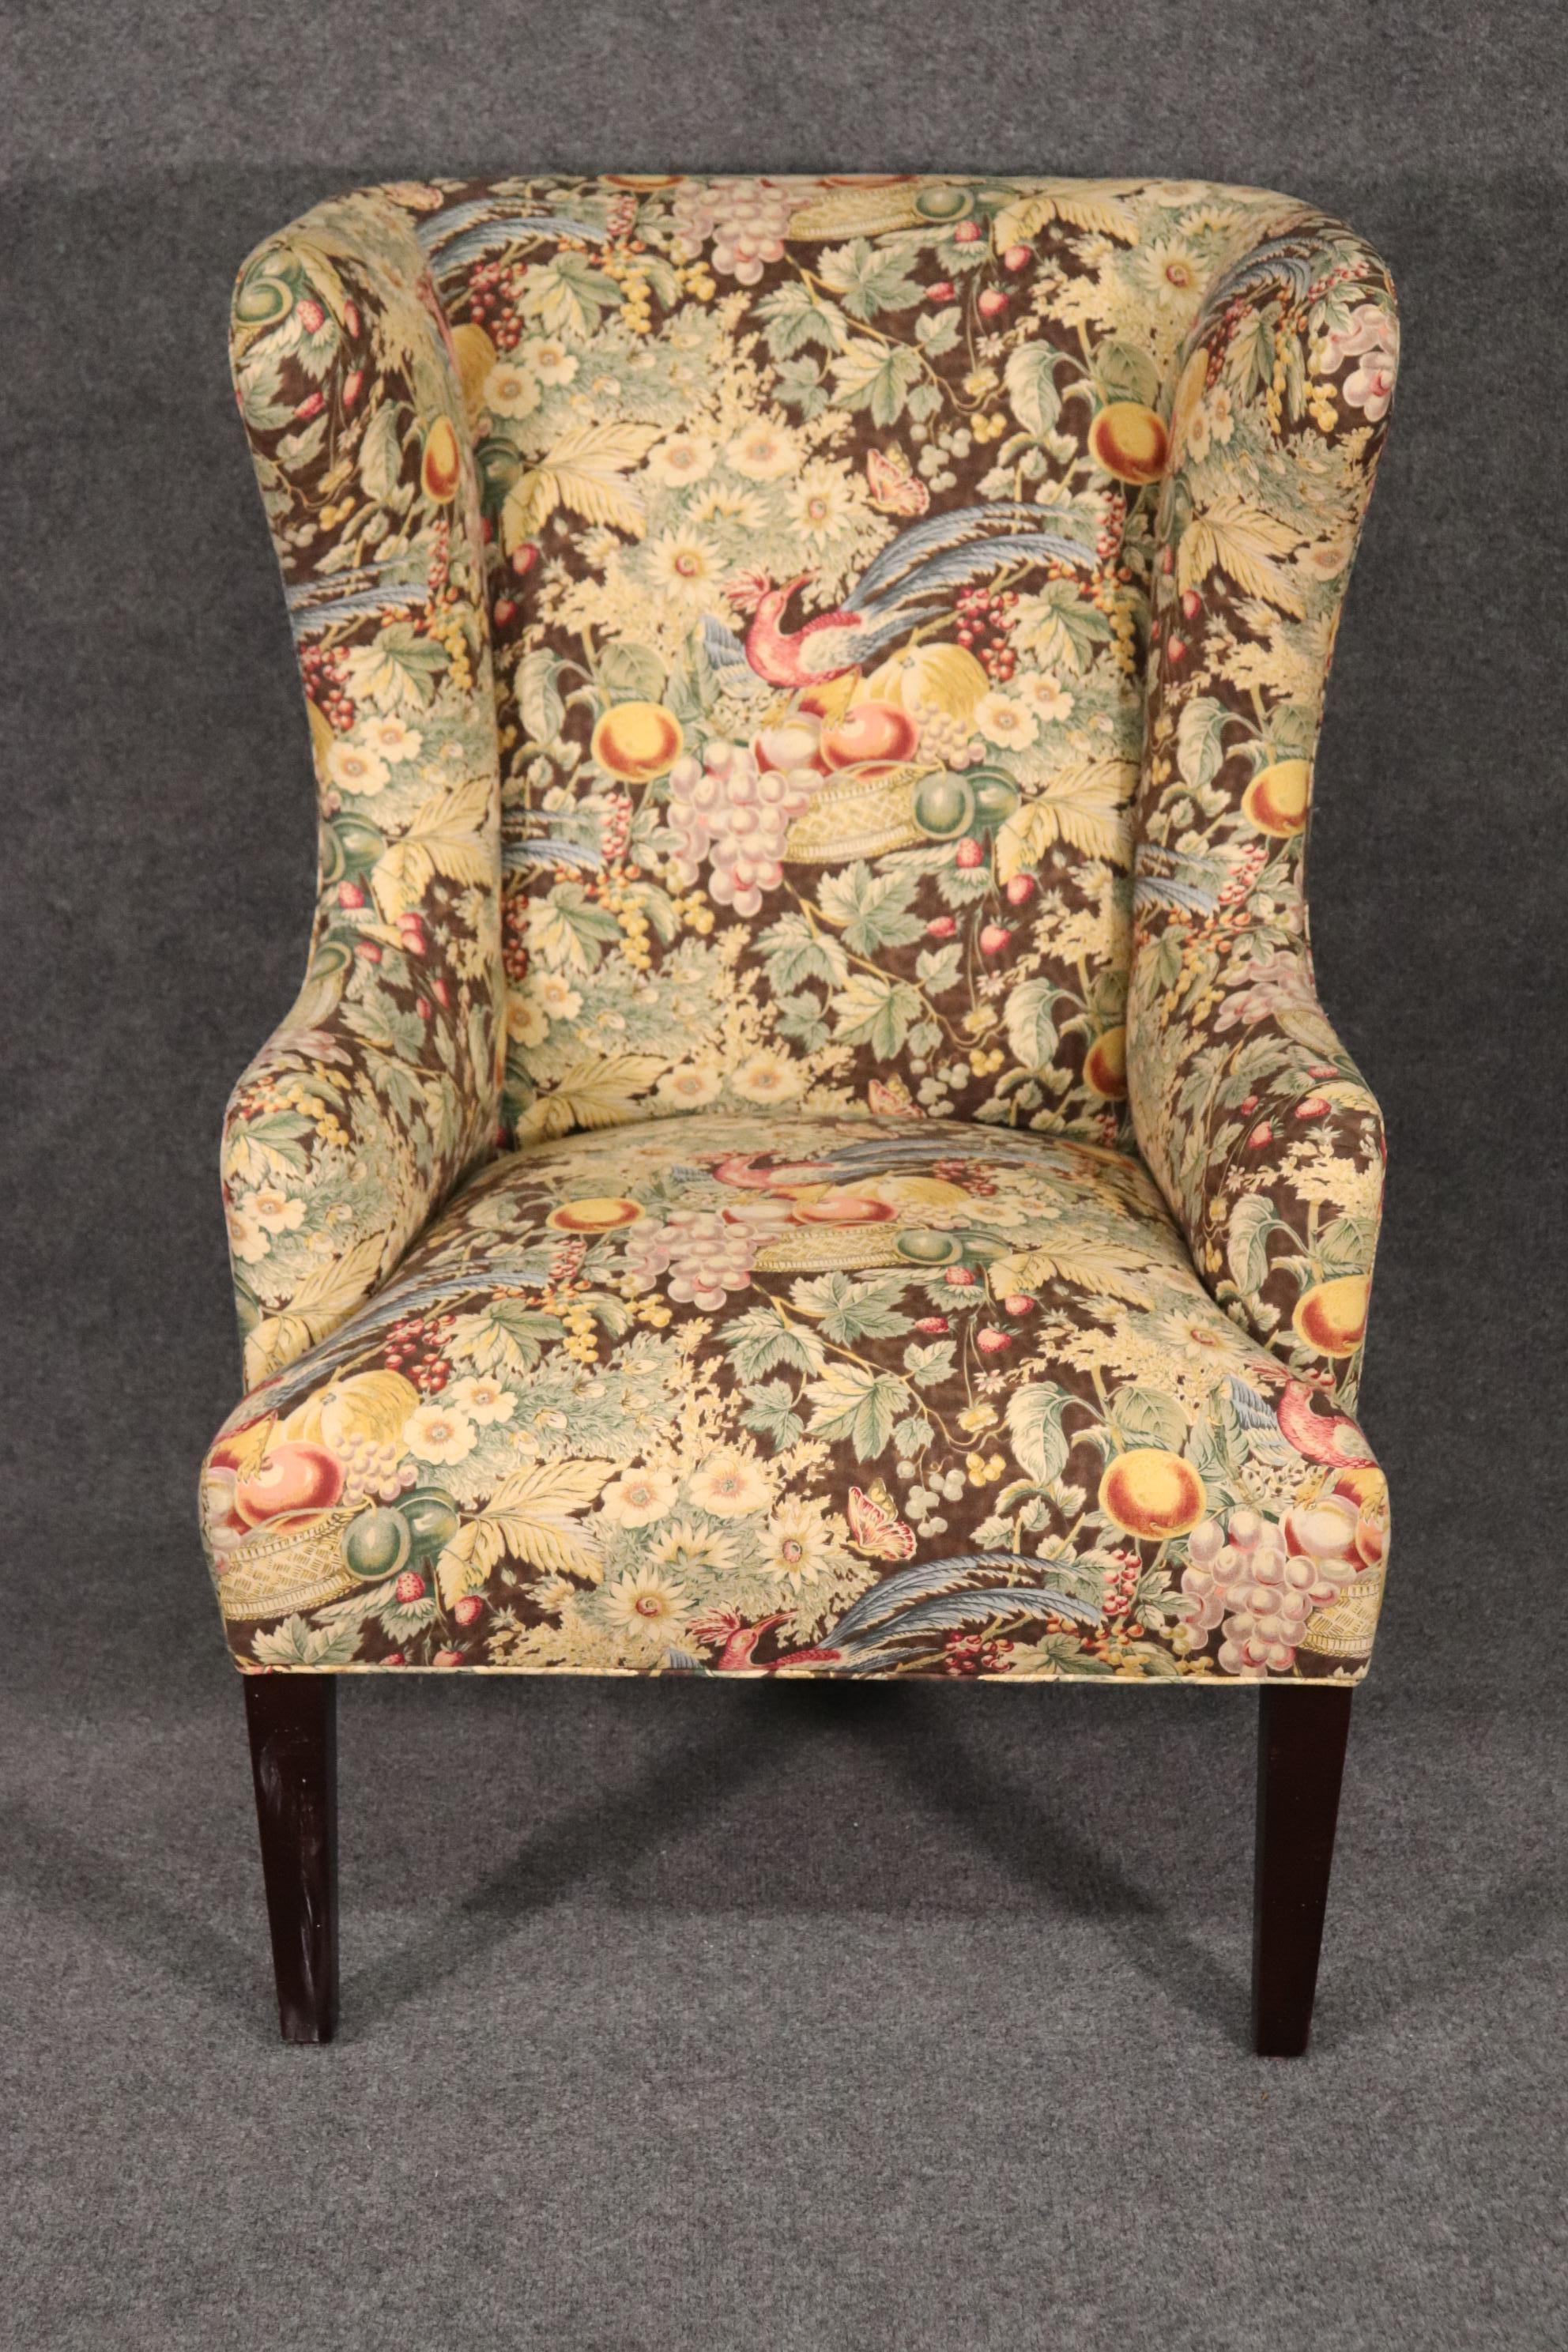 North American Baker Furniture Floral Upholstered Wingback or Fireside Chair